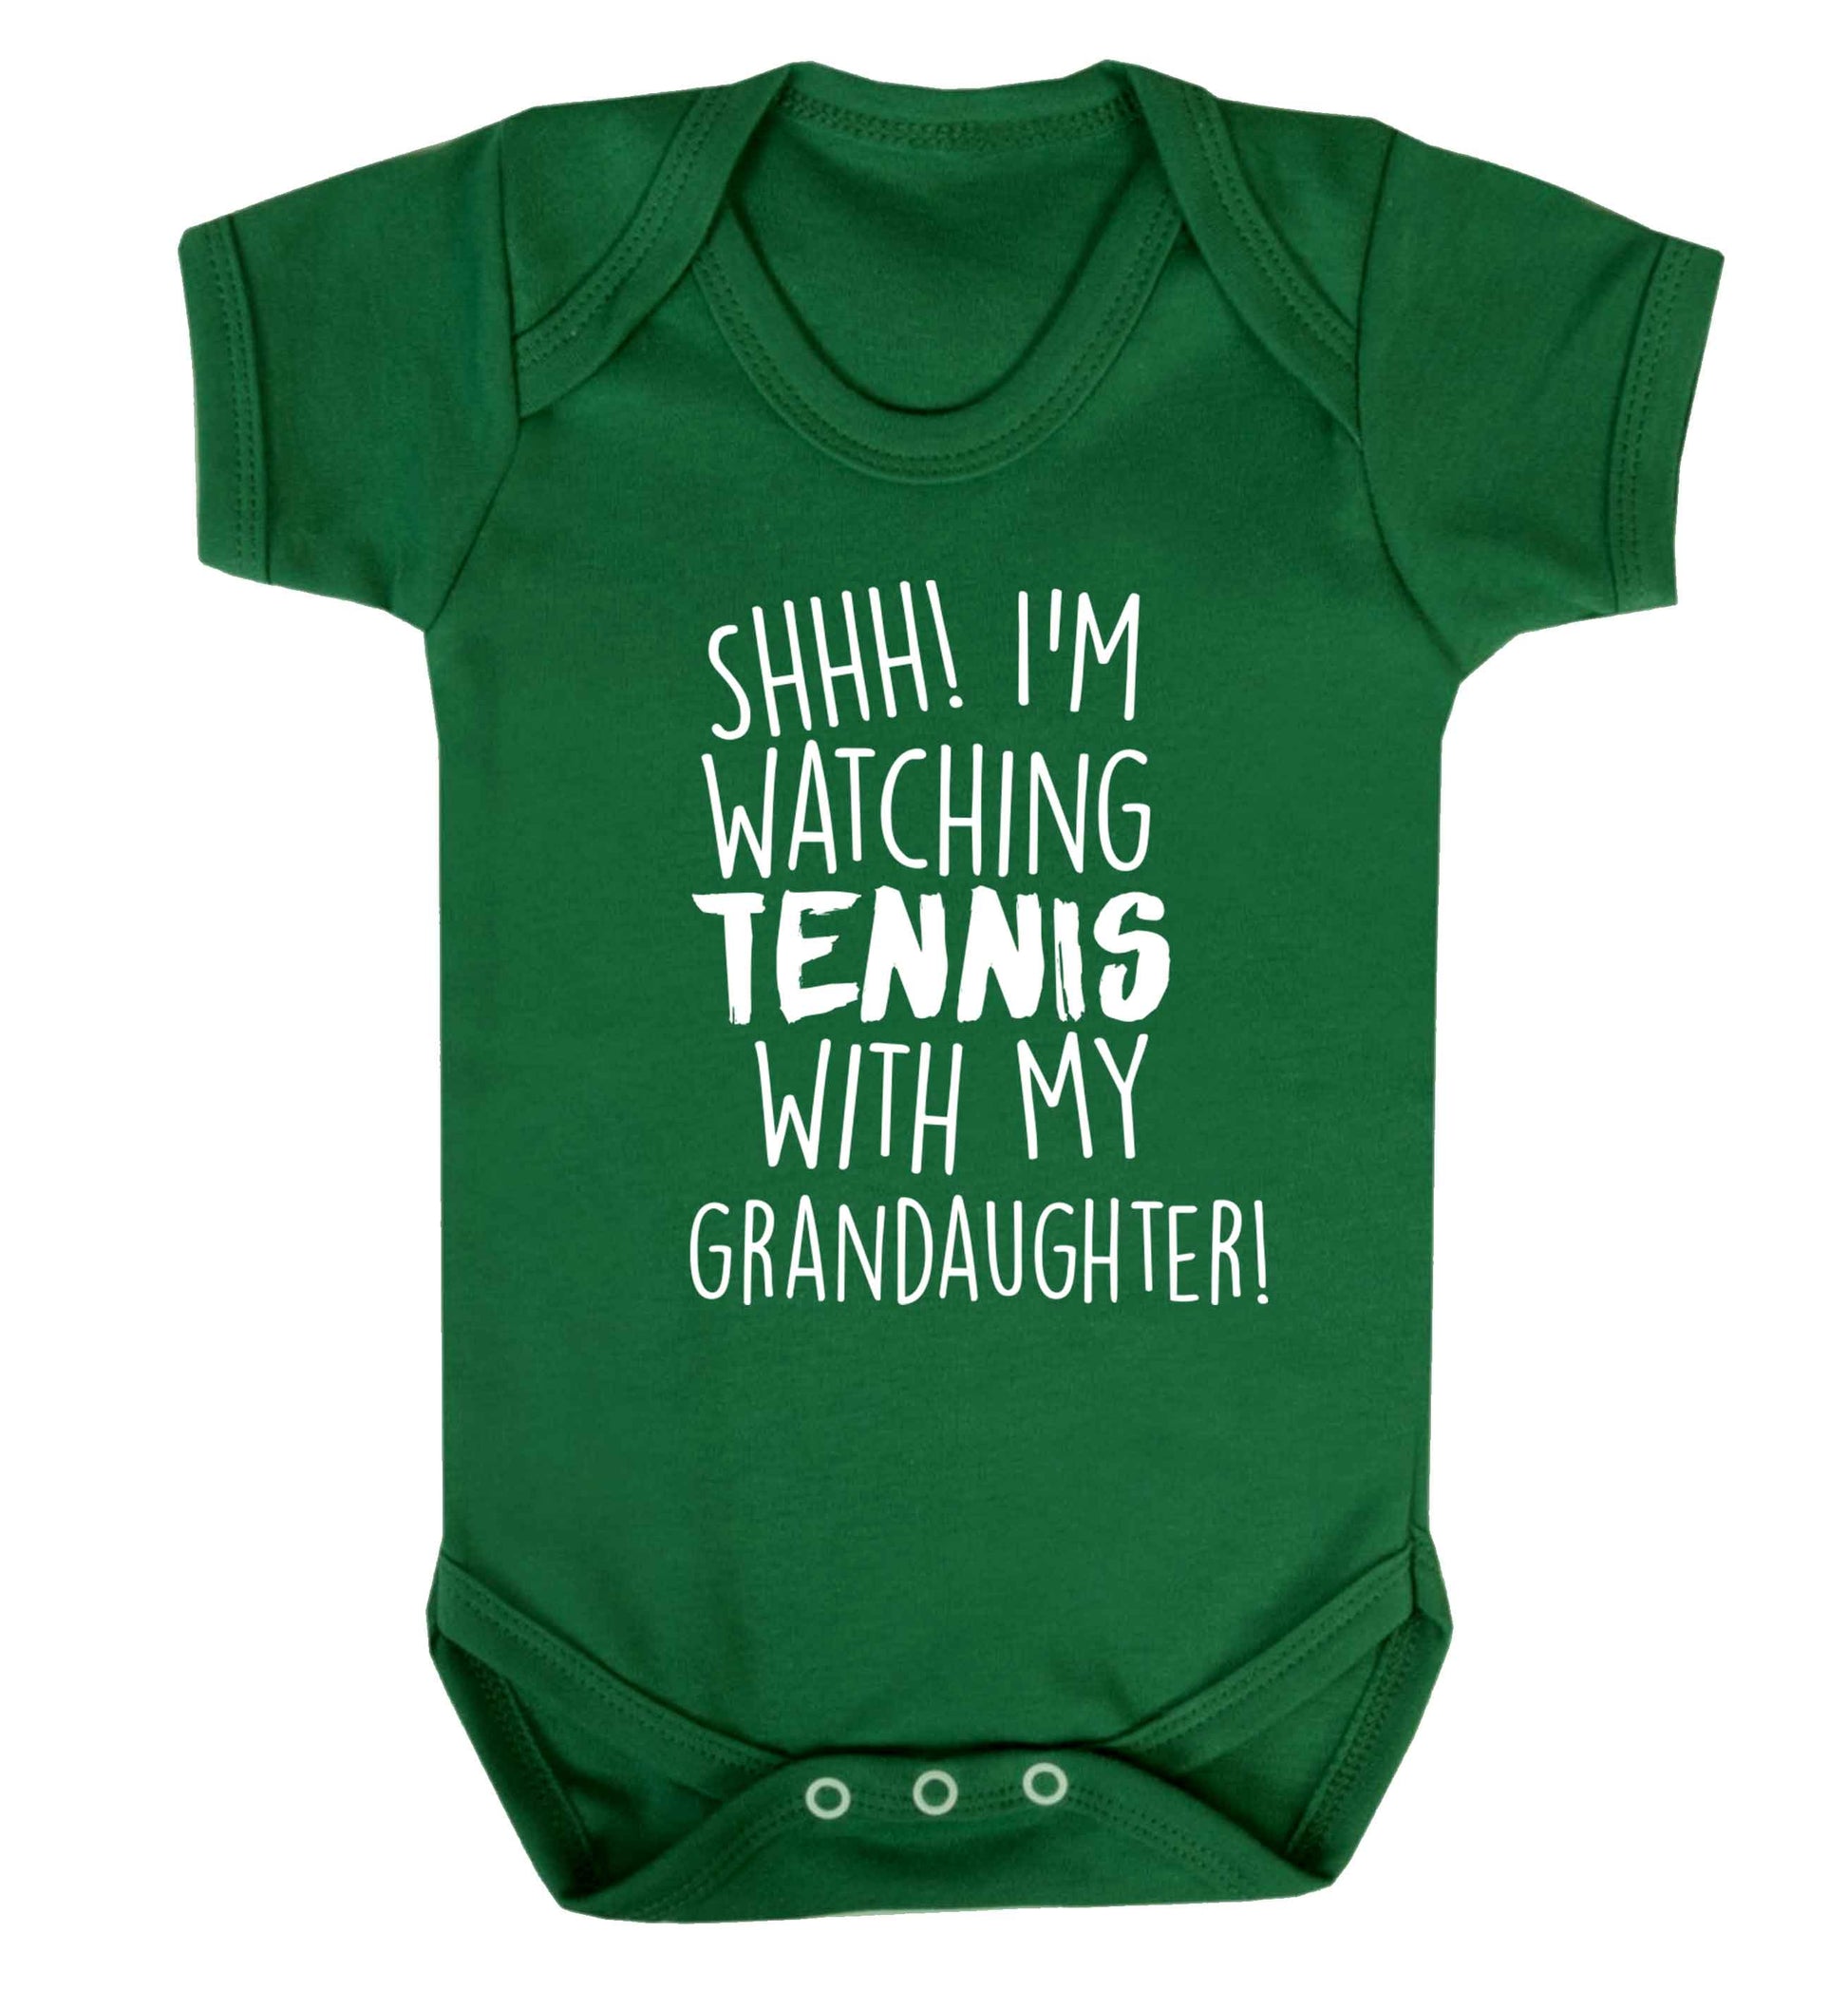 Shh! I'm watching tennis with my granddaughter! Baby Vest green 18-24 months